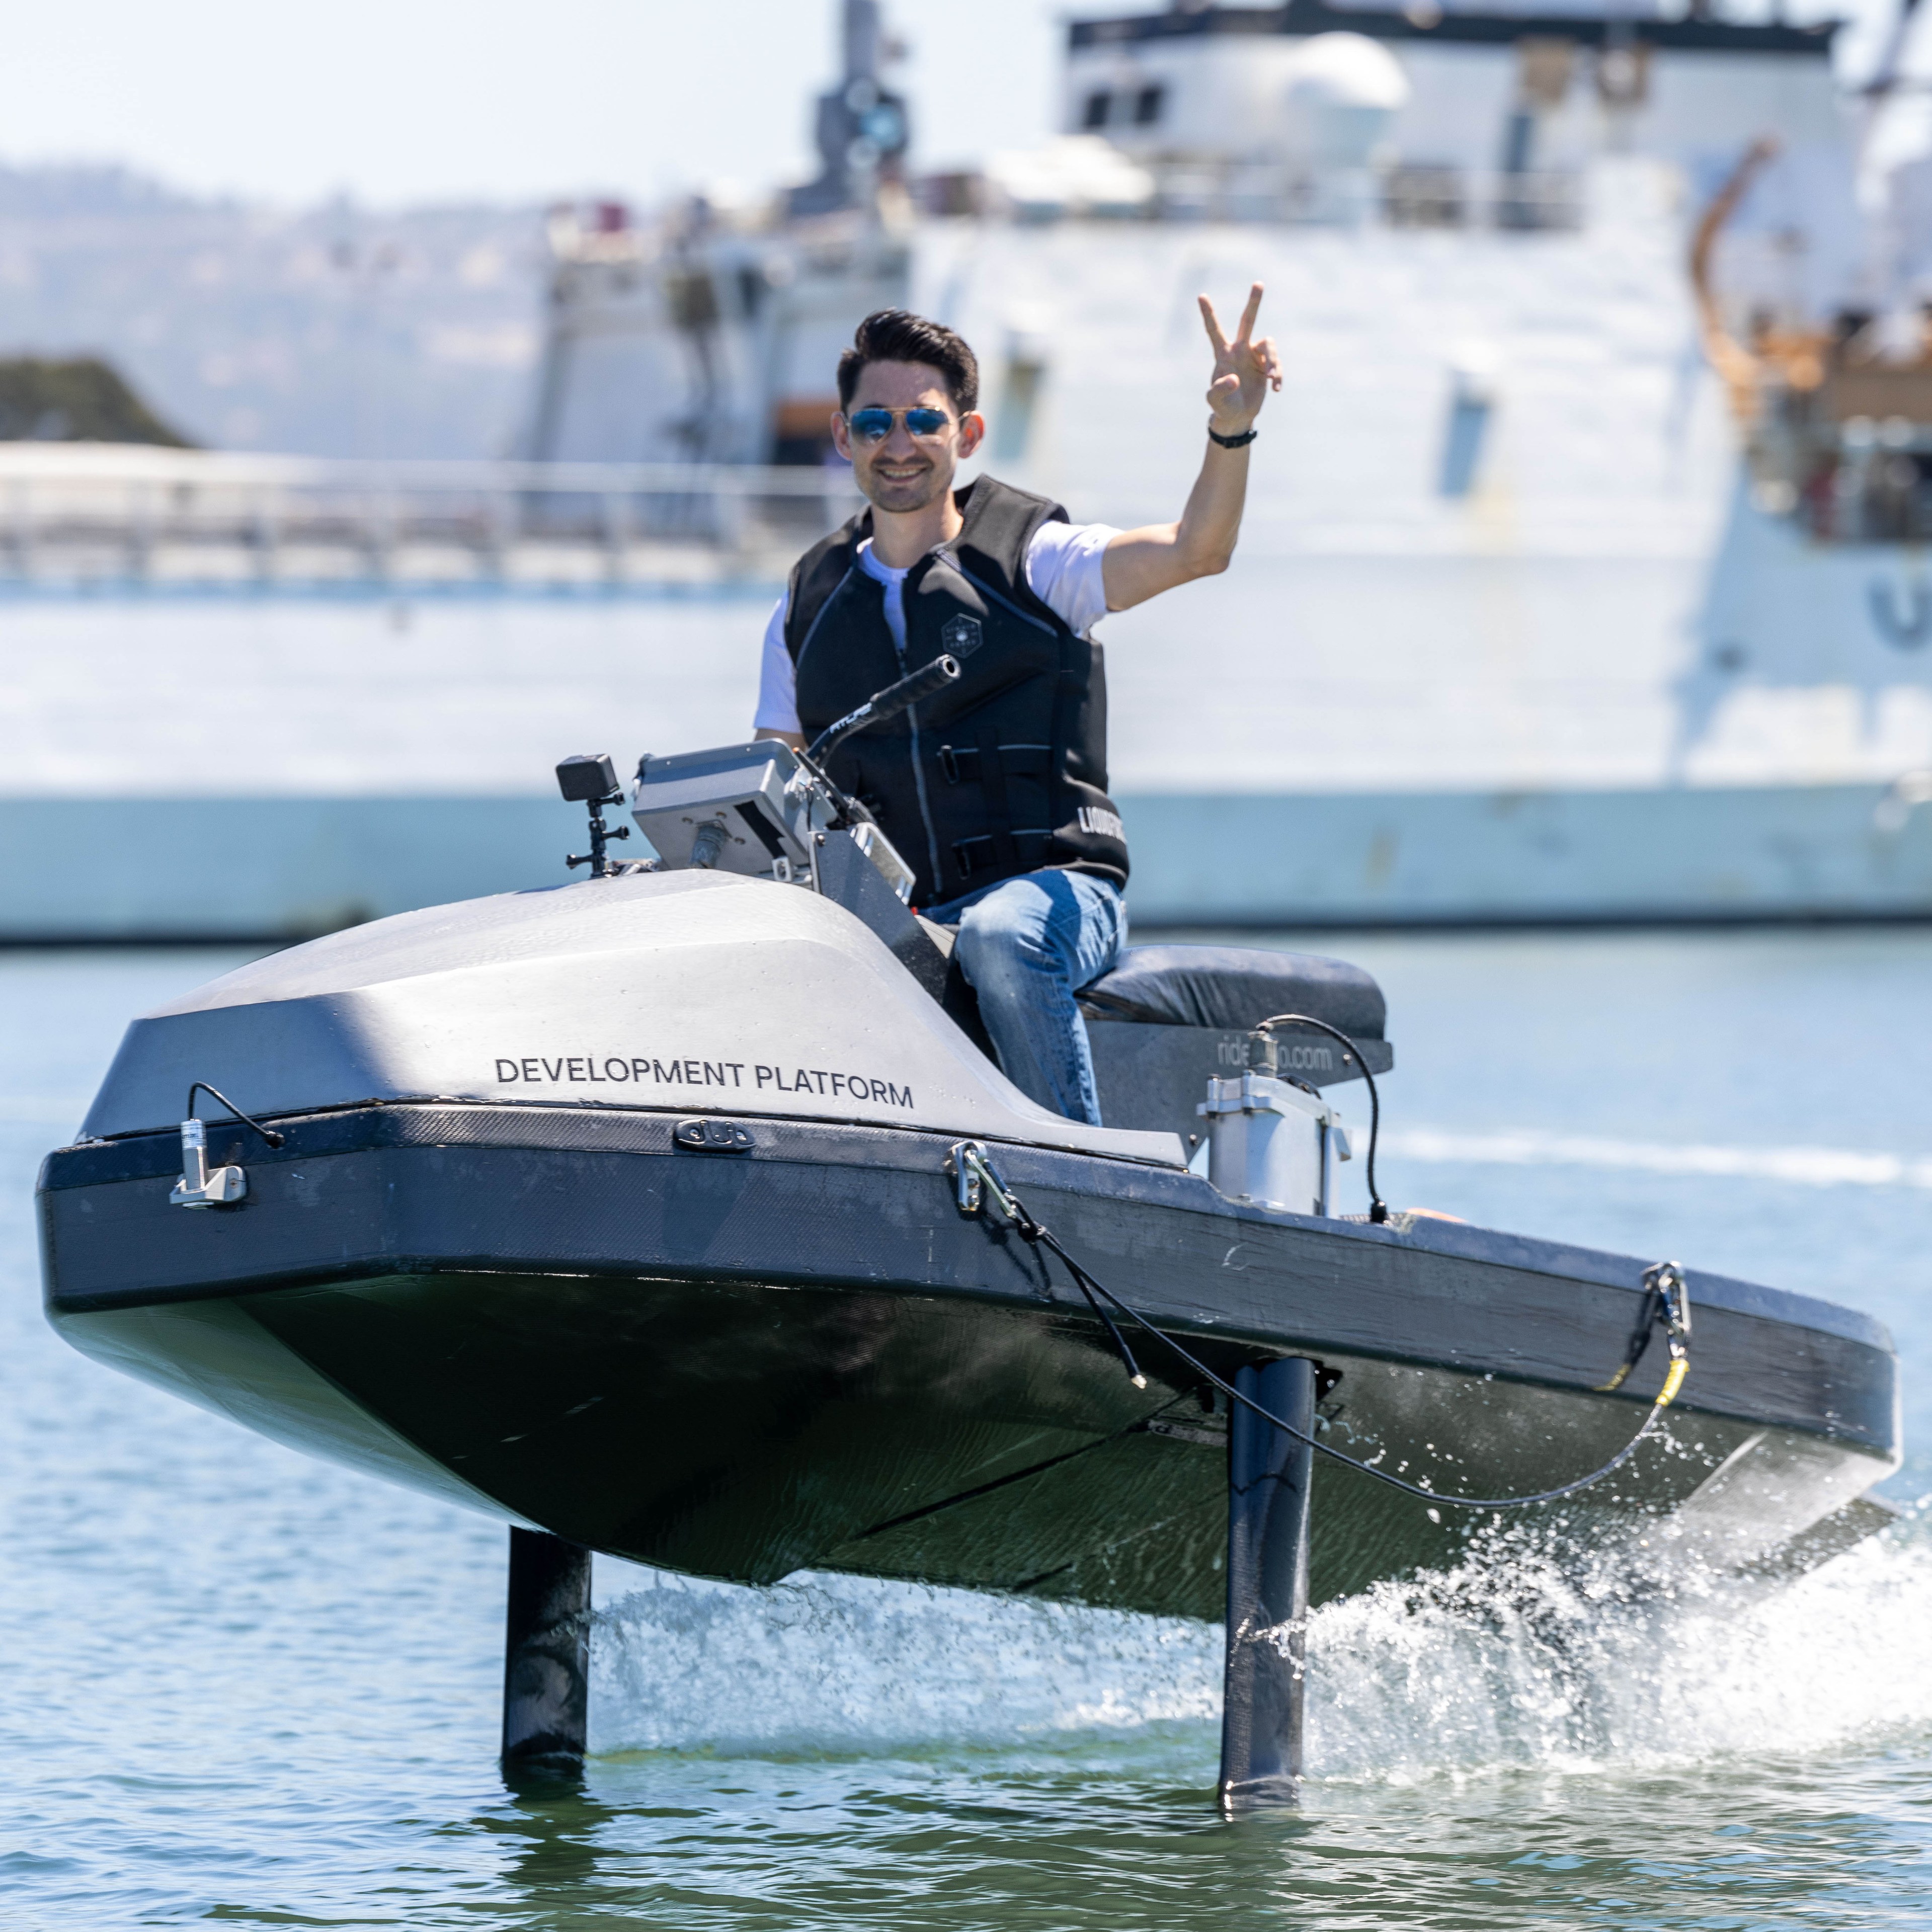 A man wearing sunglasses and a life vest smiles and makes a peace sign while riding a &quot;Development Platform&quot; hydrofoil boat on the water, with ships in the background.